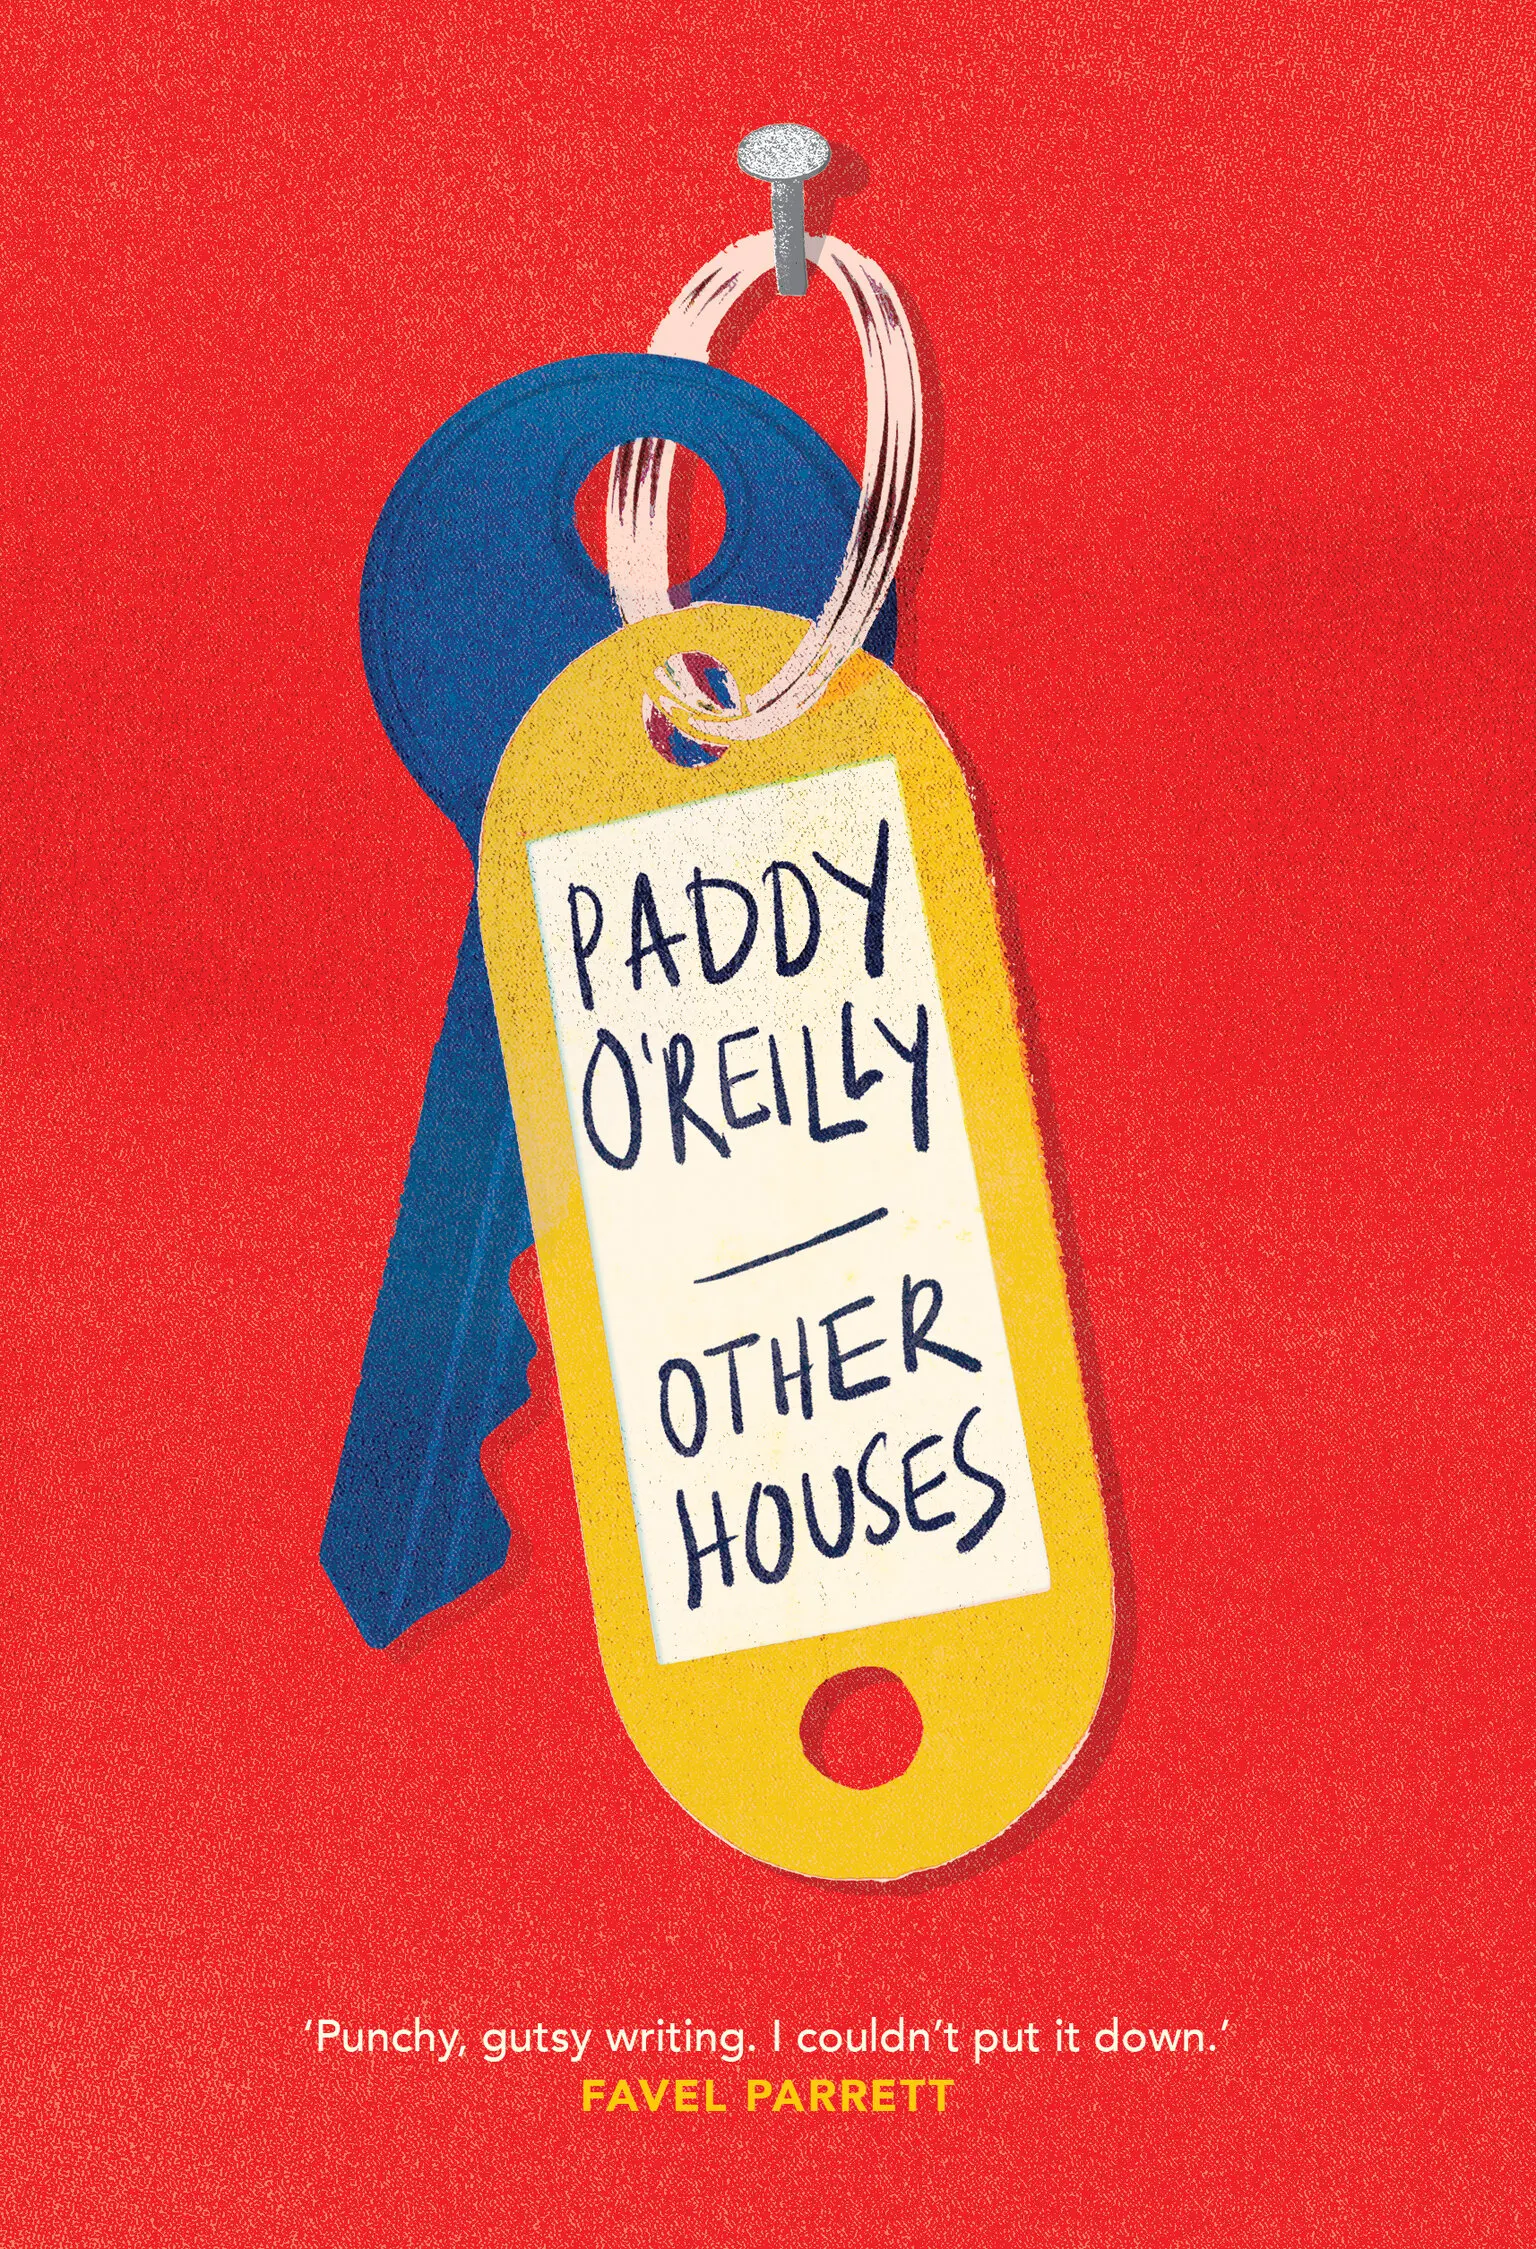 Other houses, Paddy O'Reilly